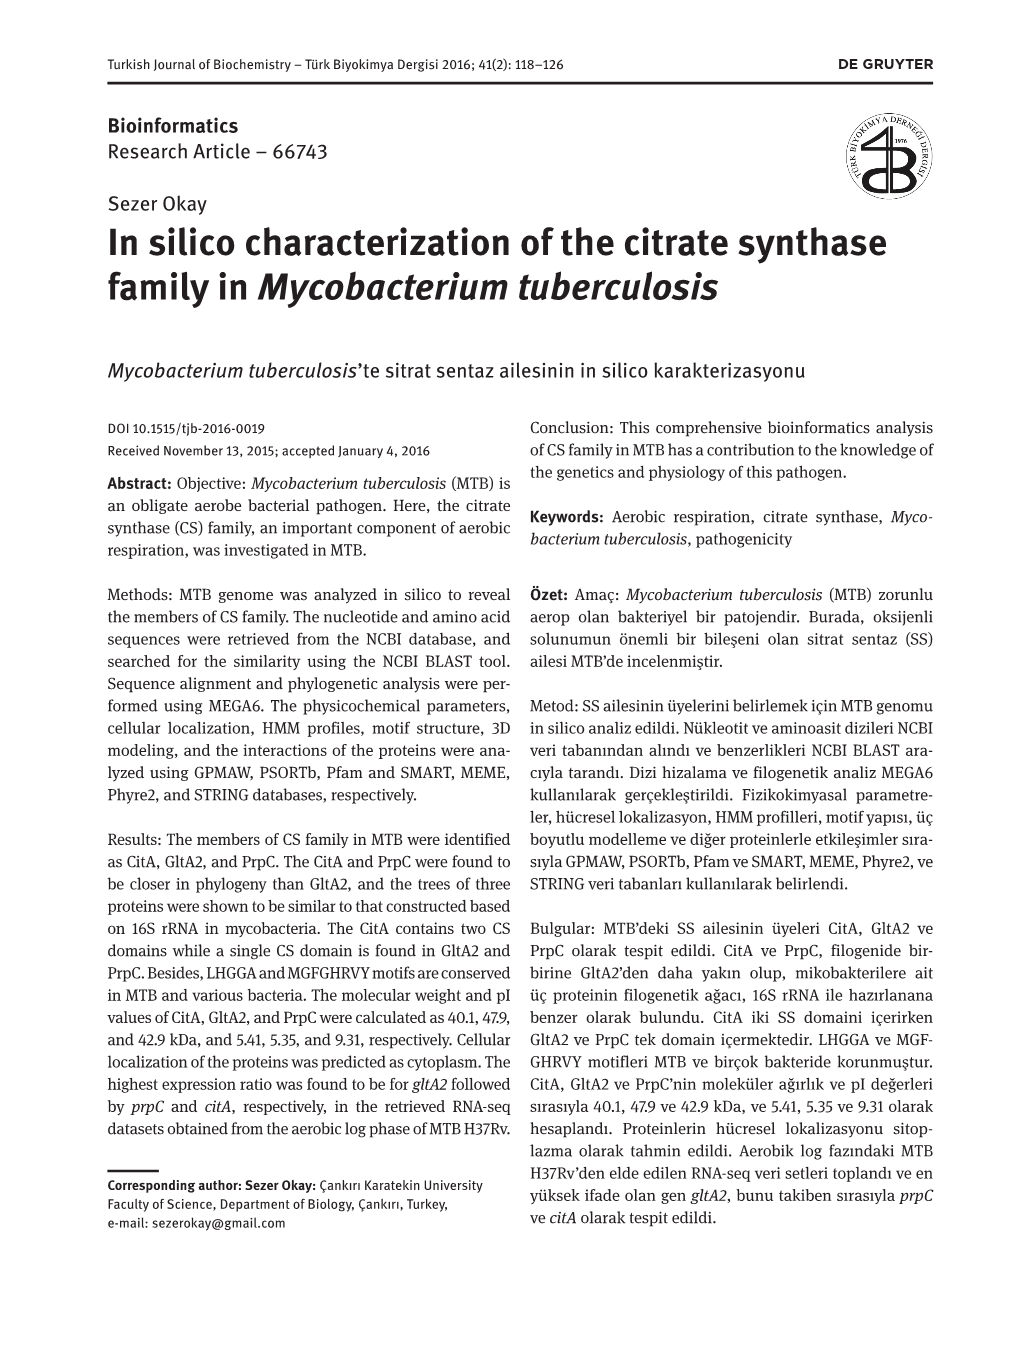 In Silico Characterization of the Citrate Synthase Family in Mycobacterium Tuberculosis